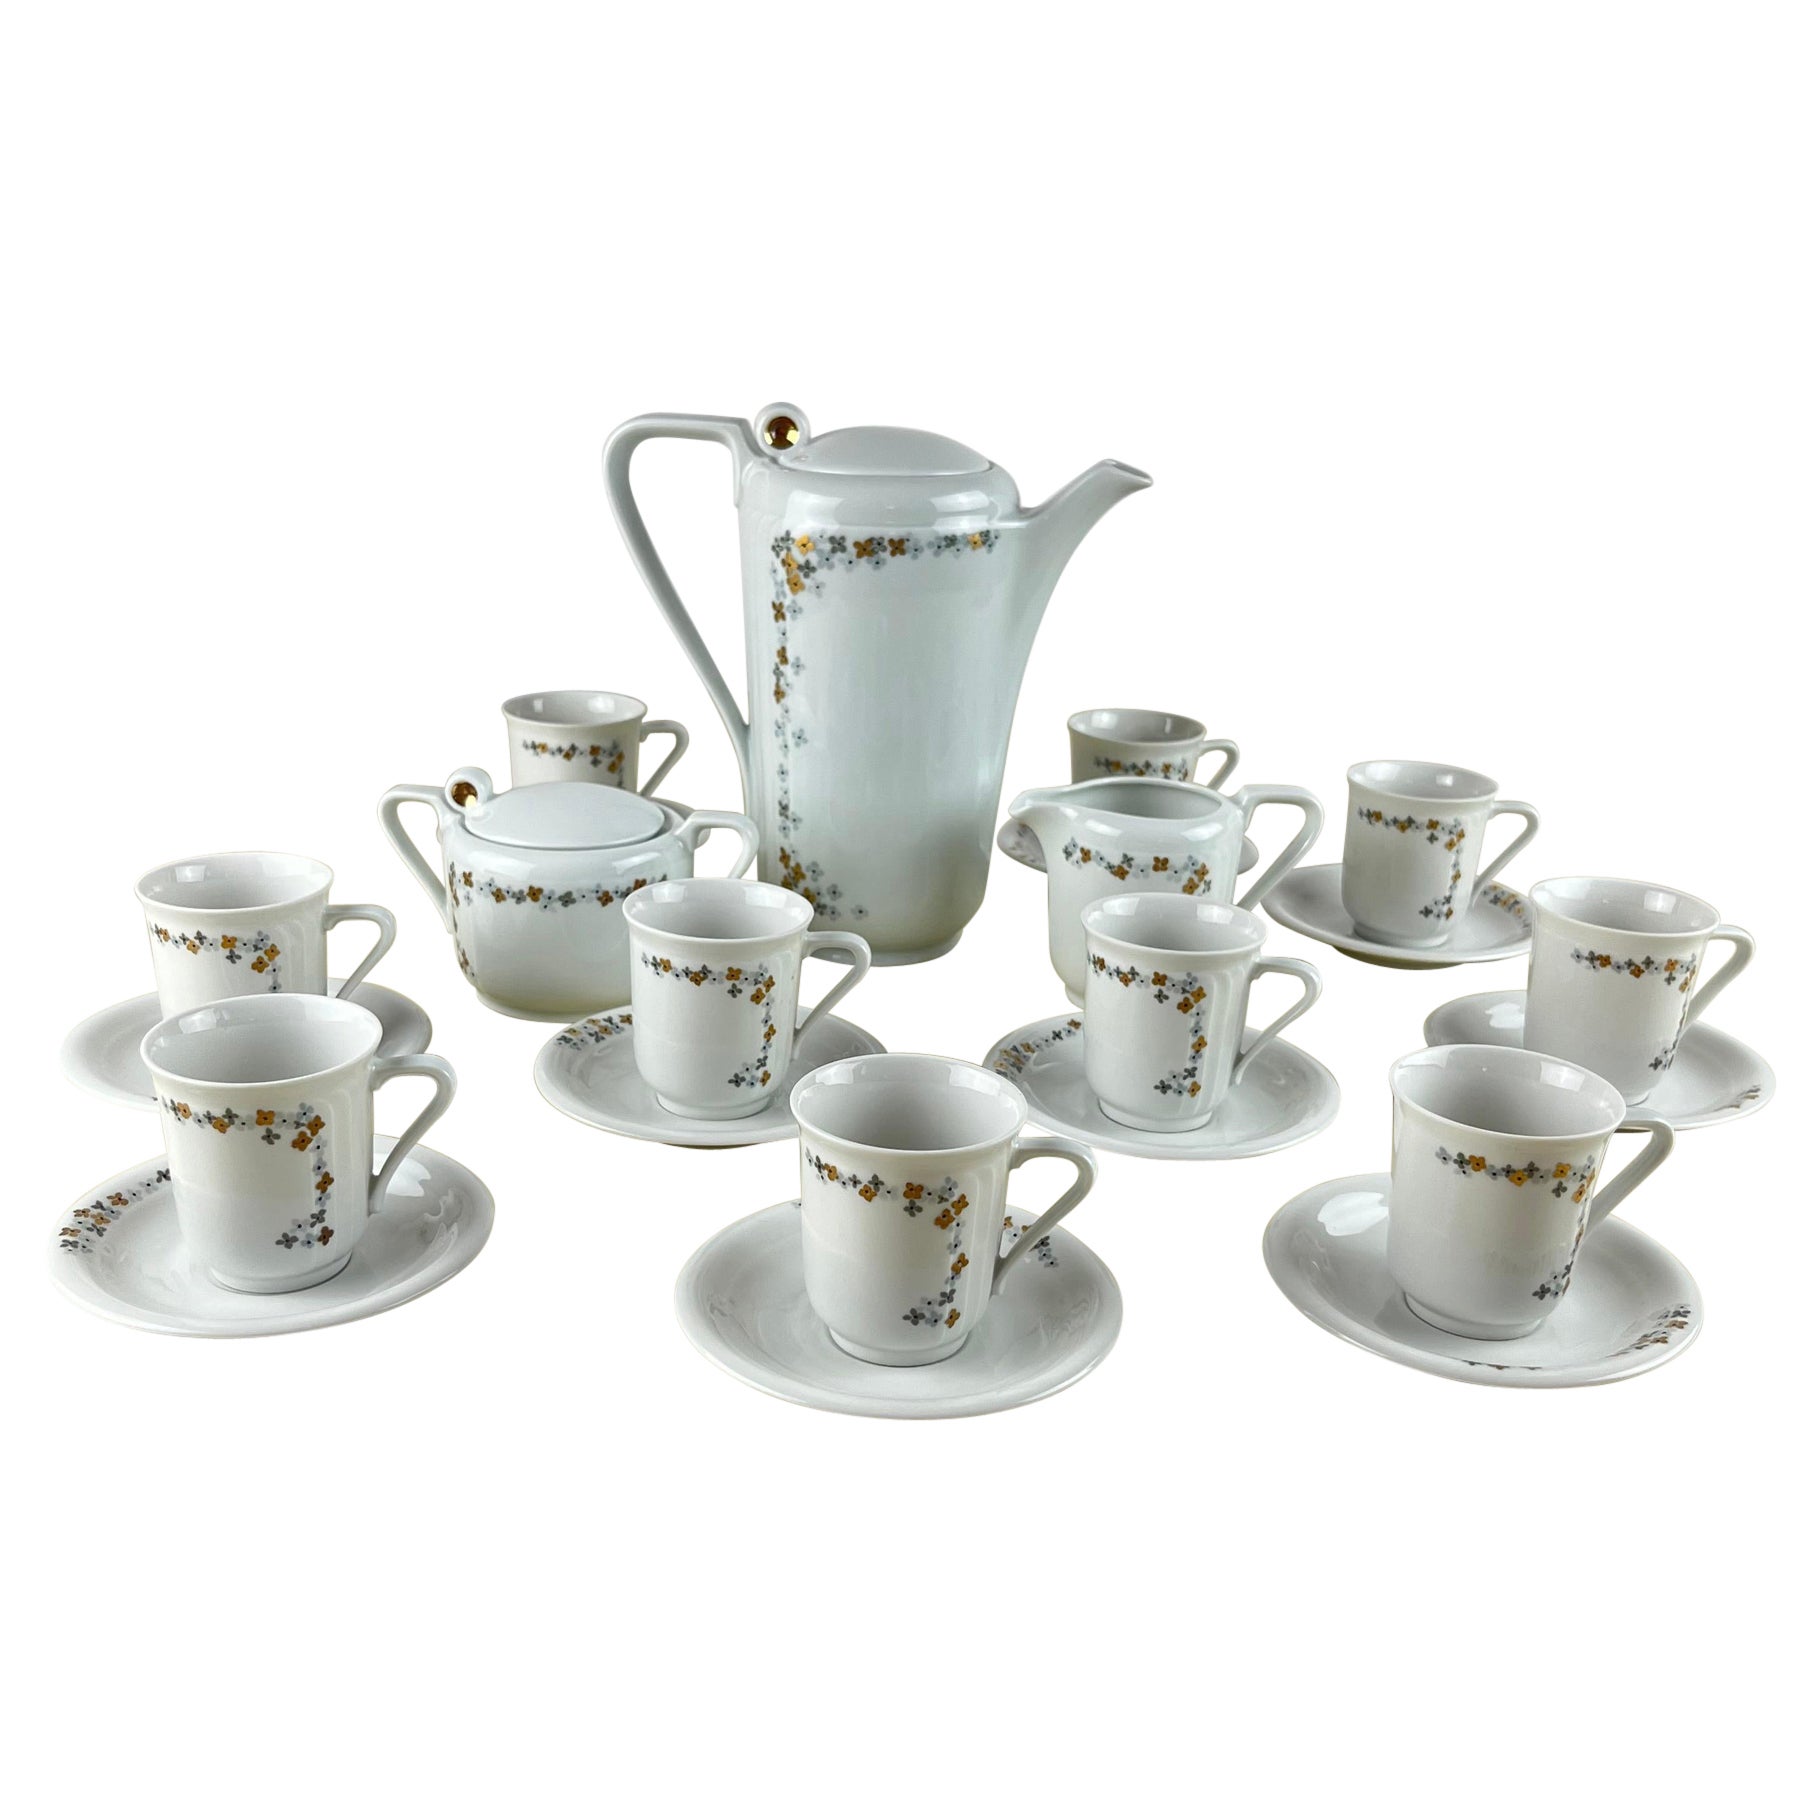 Bareuther Bavaria Coffee Service, made in Germany, 1980s